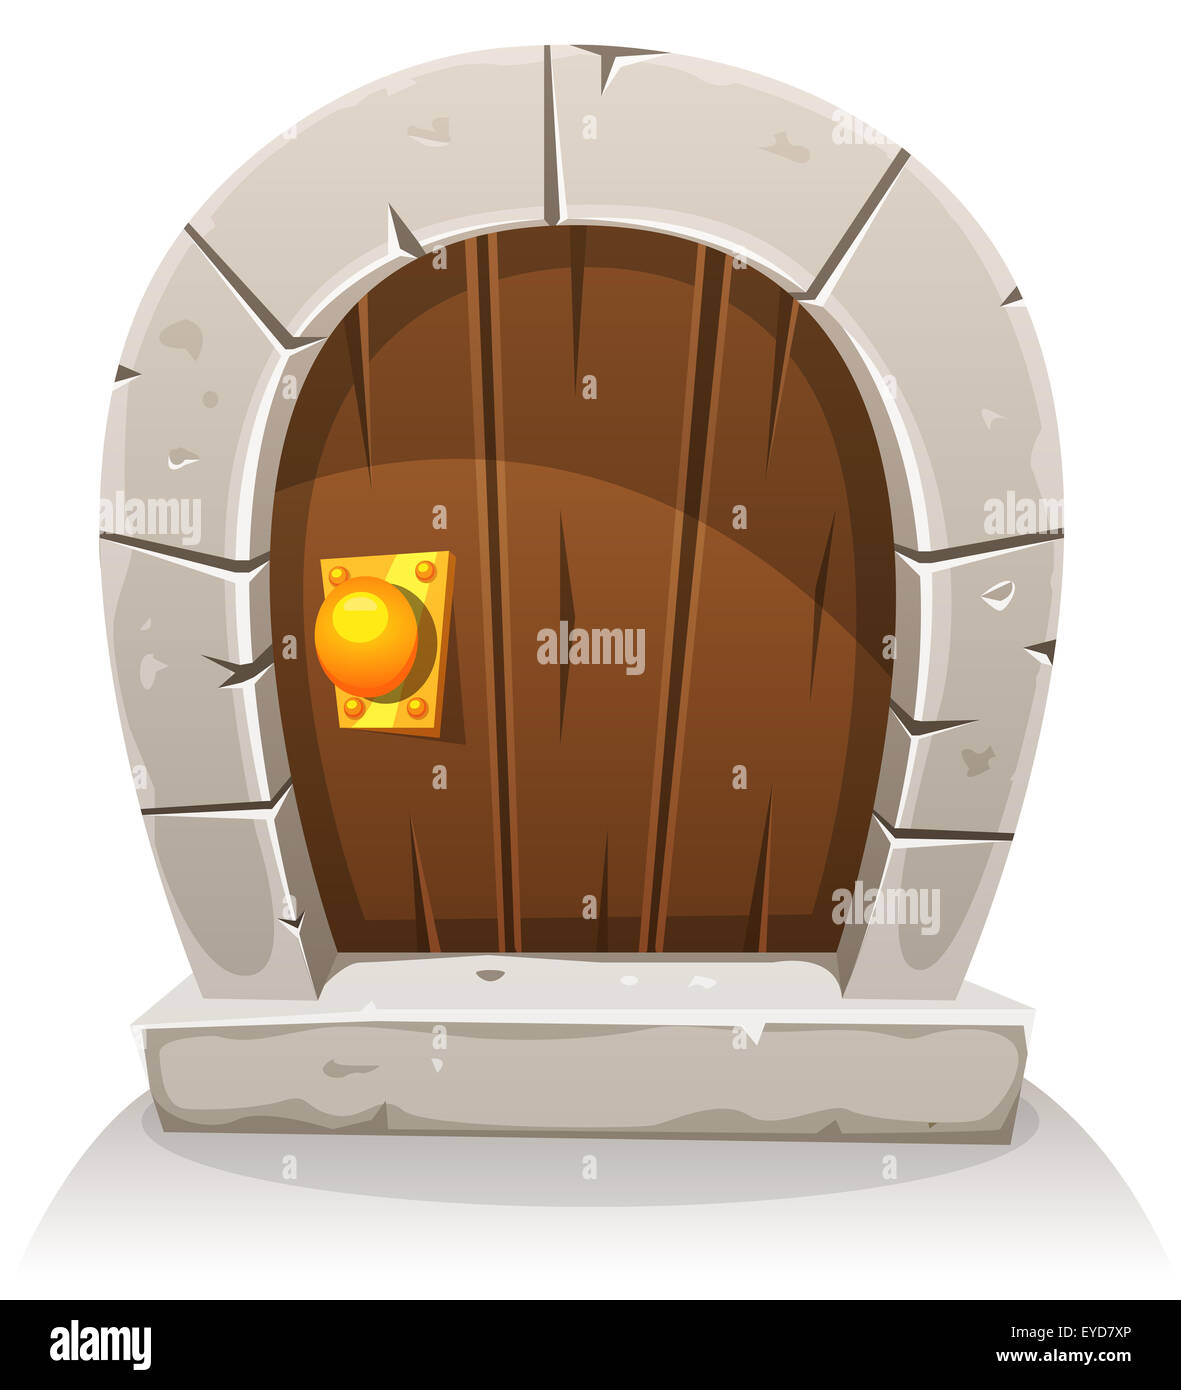 Illustration of a cartoon comic hobbit like funny little curved wood door with stone doorframe Stock Photo